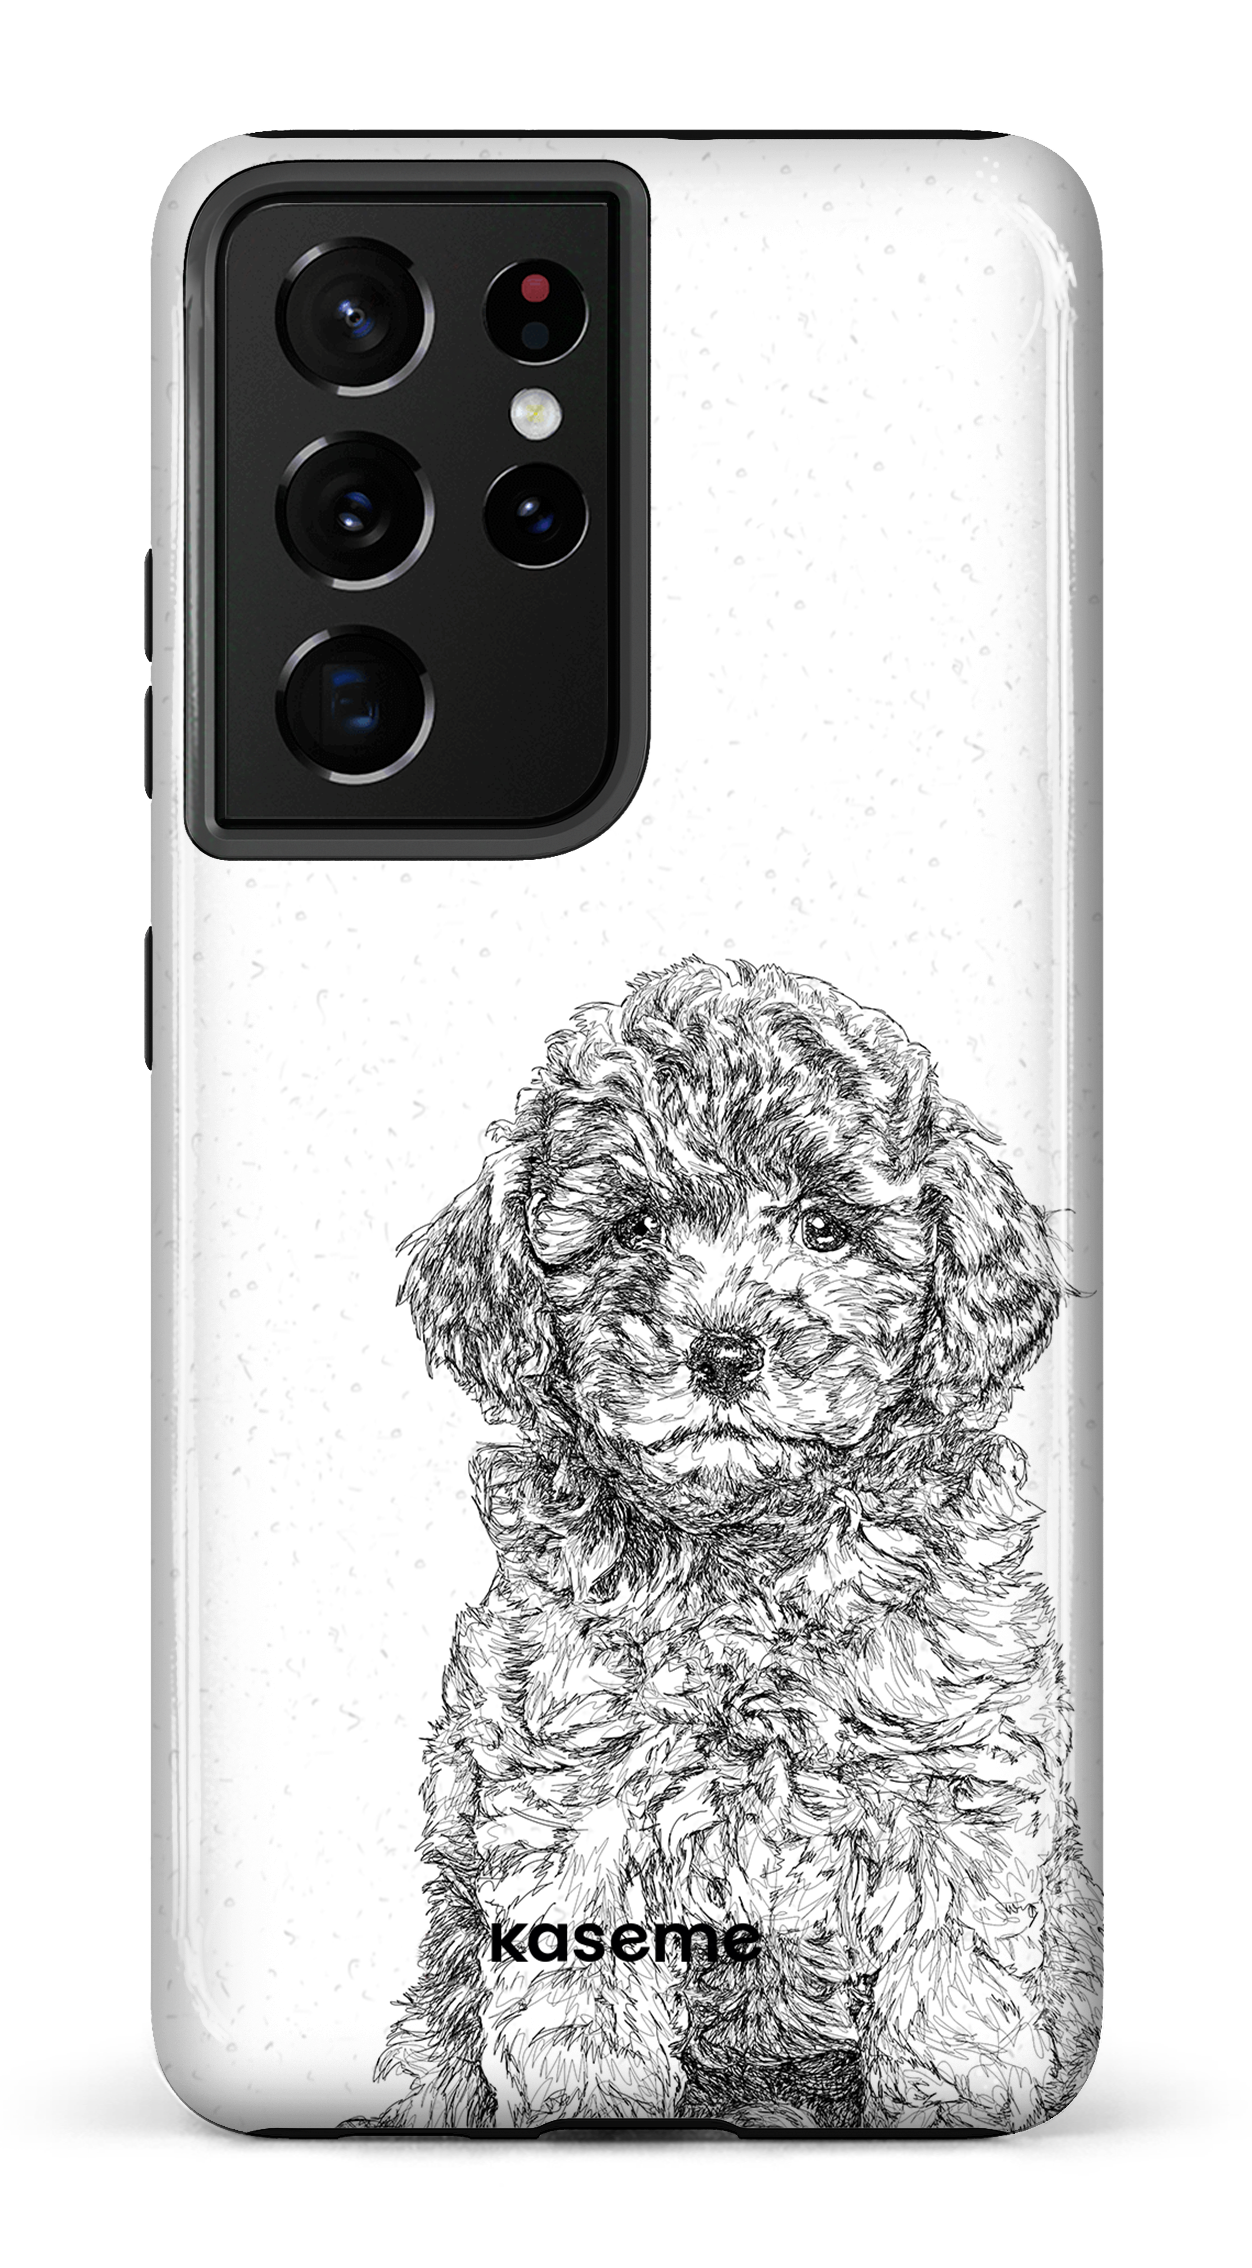 Toy Poodle - Galaxy S21 Ultra